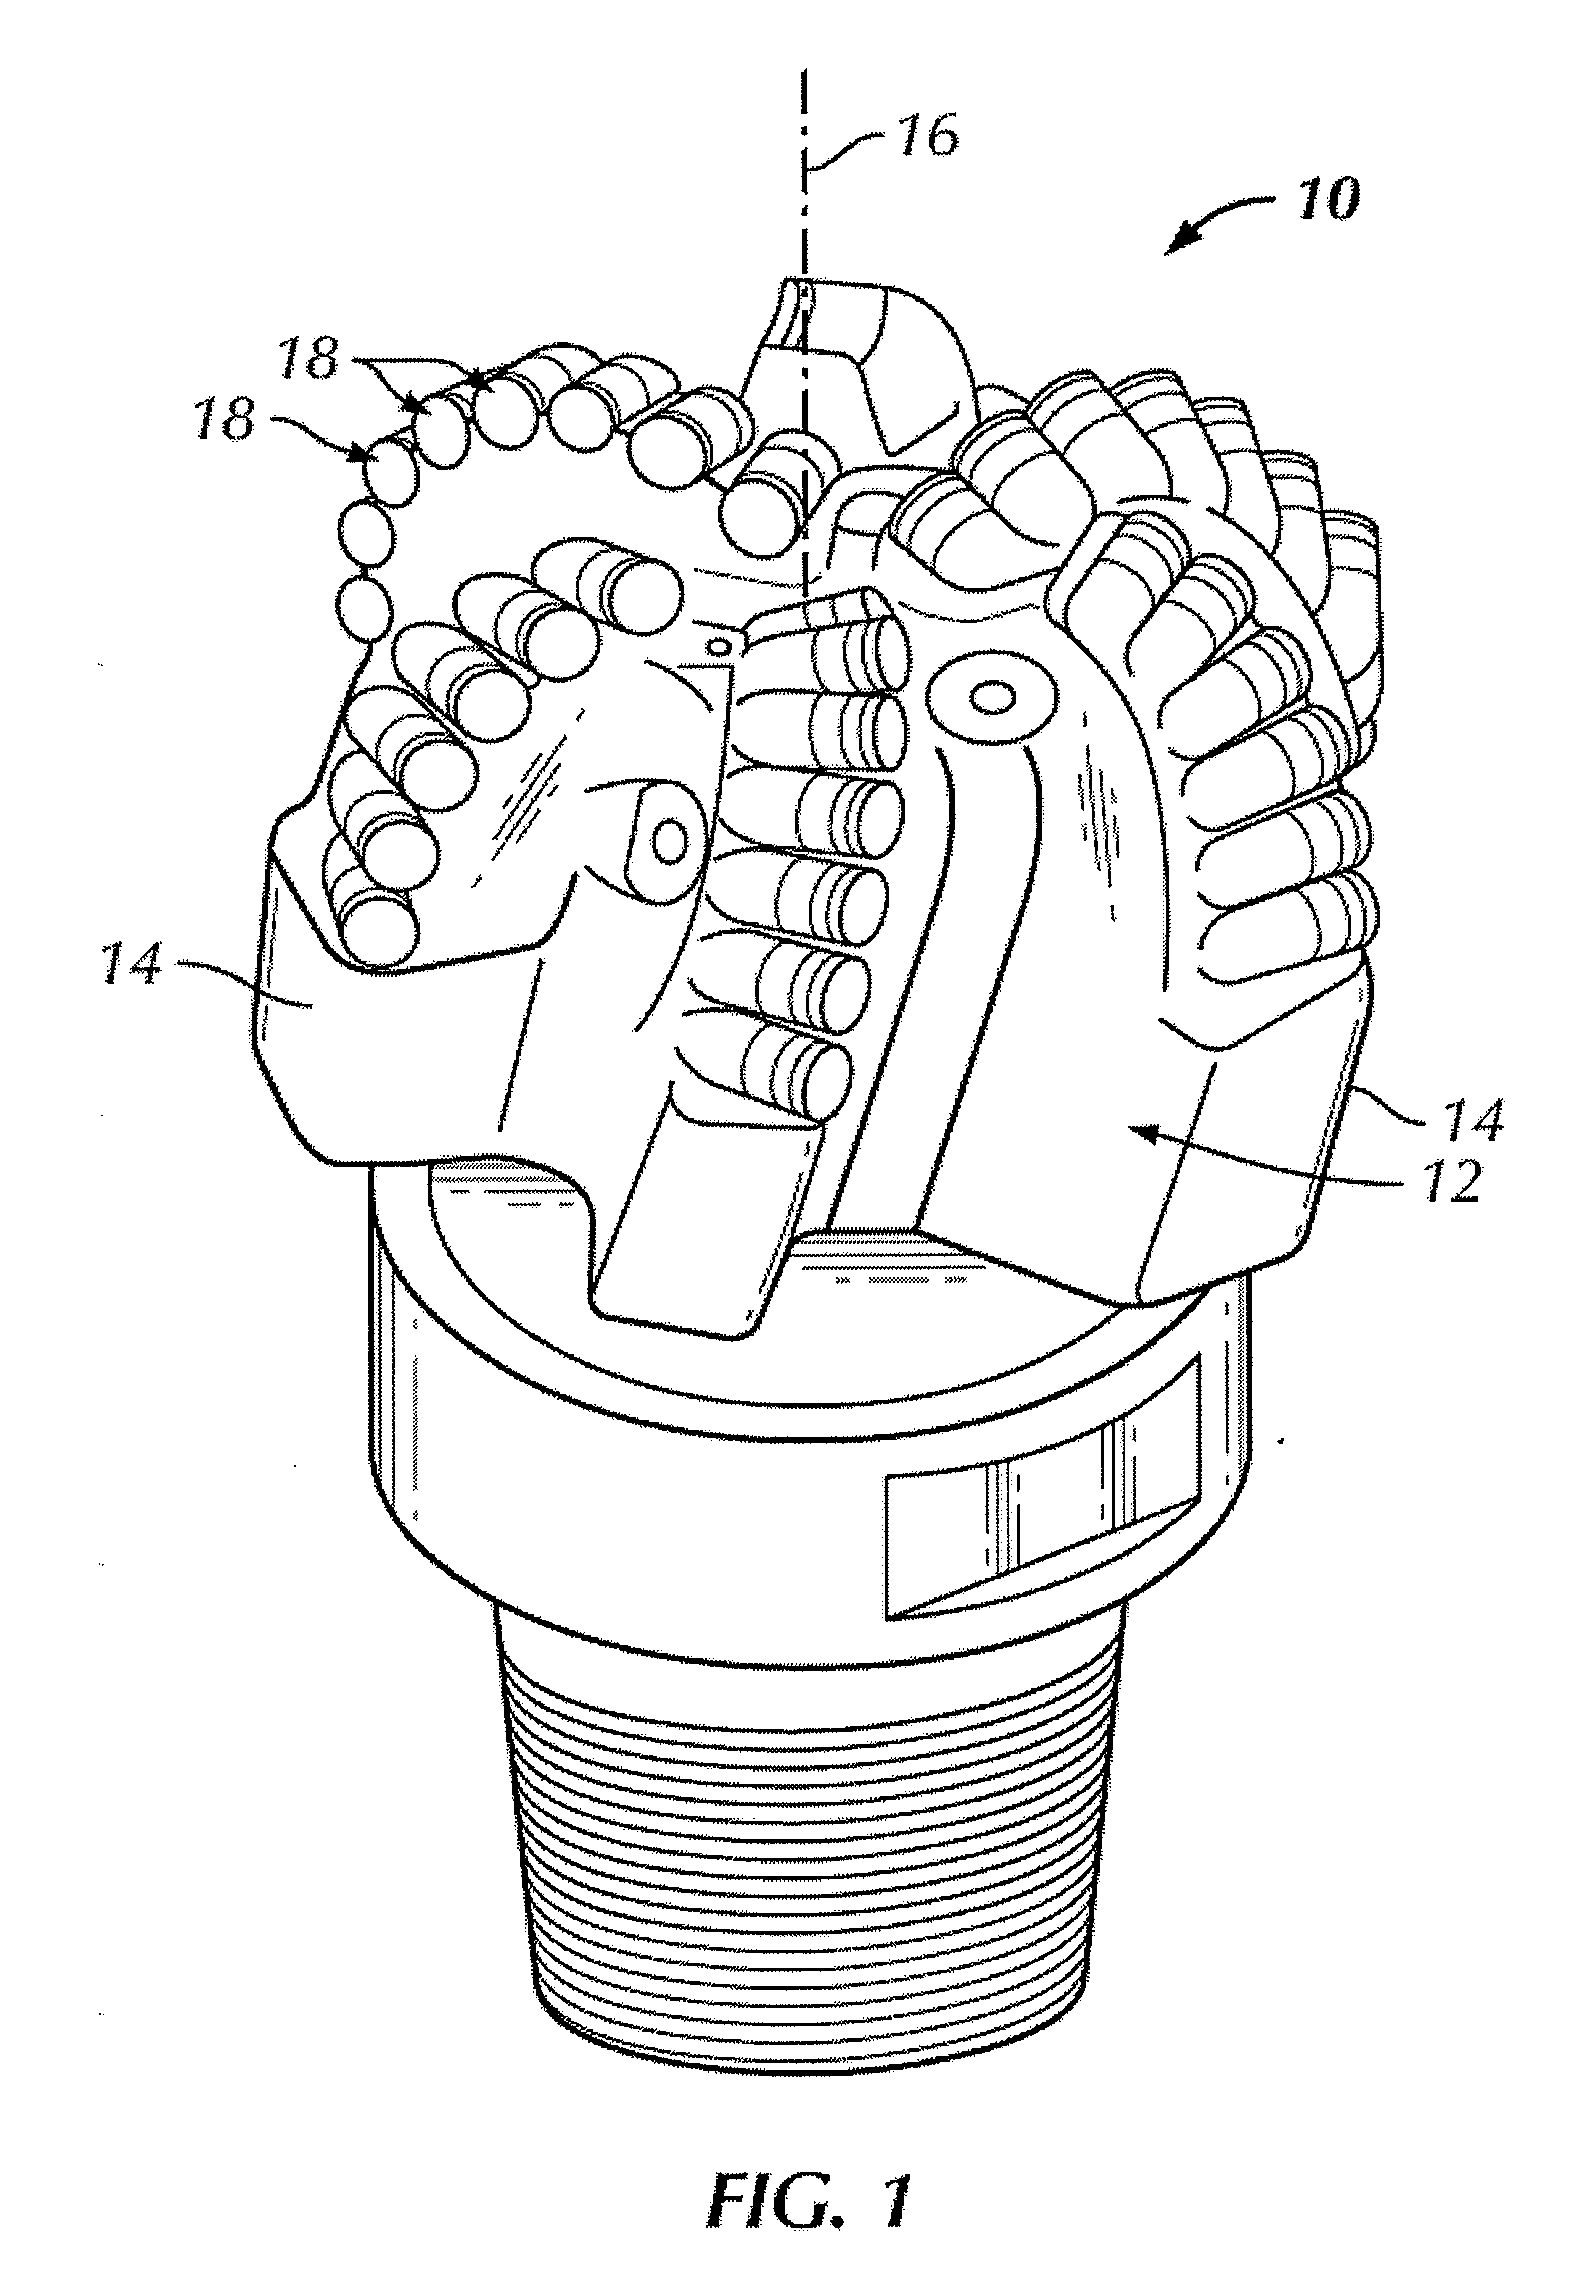 Methods of forming polycrystalline diamond cutters